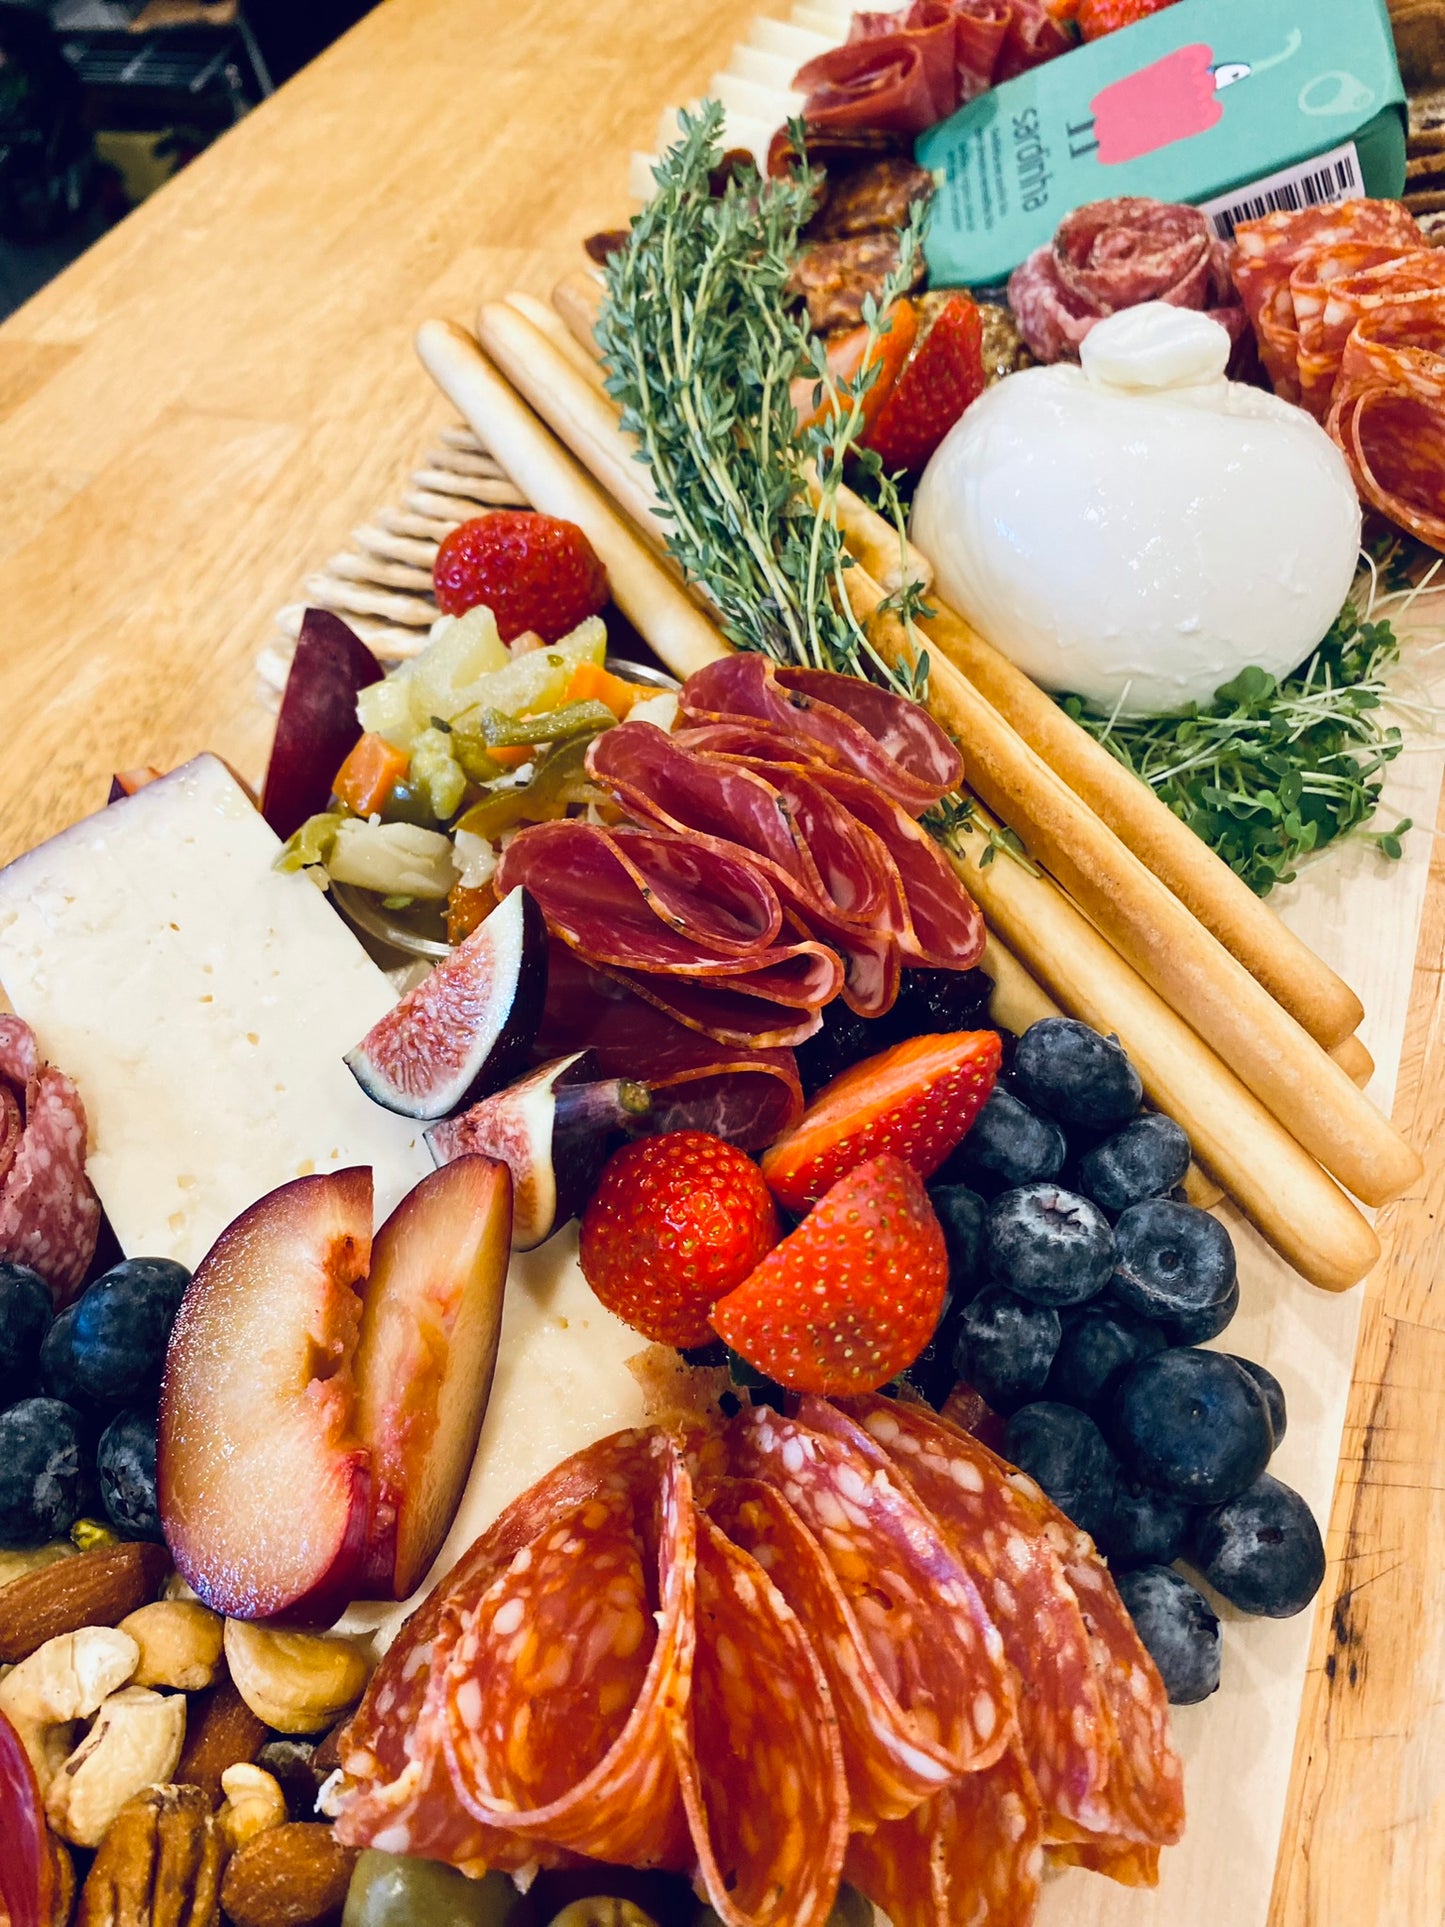 Classic Charcuterie & Cheese